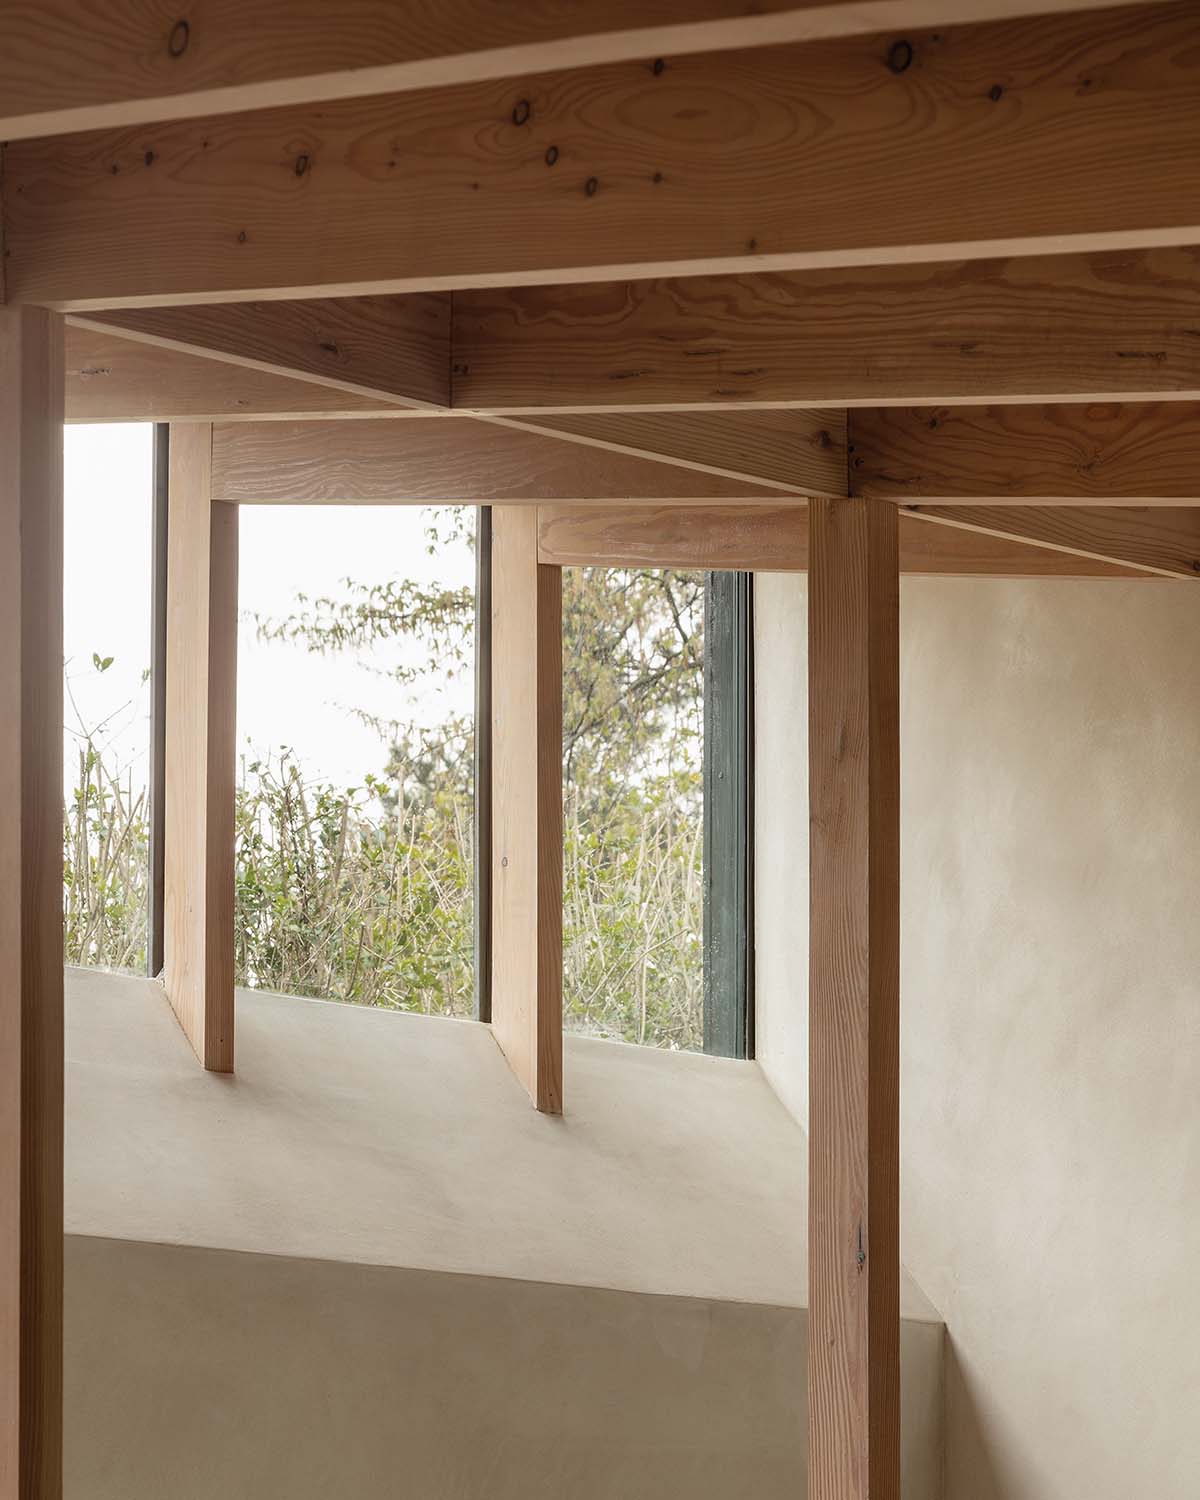 Wooden beams let in natural light in this home